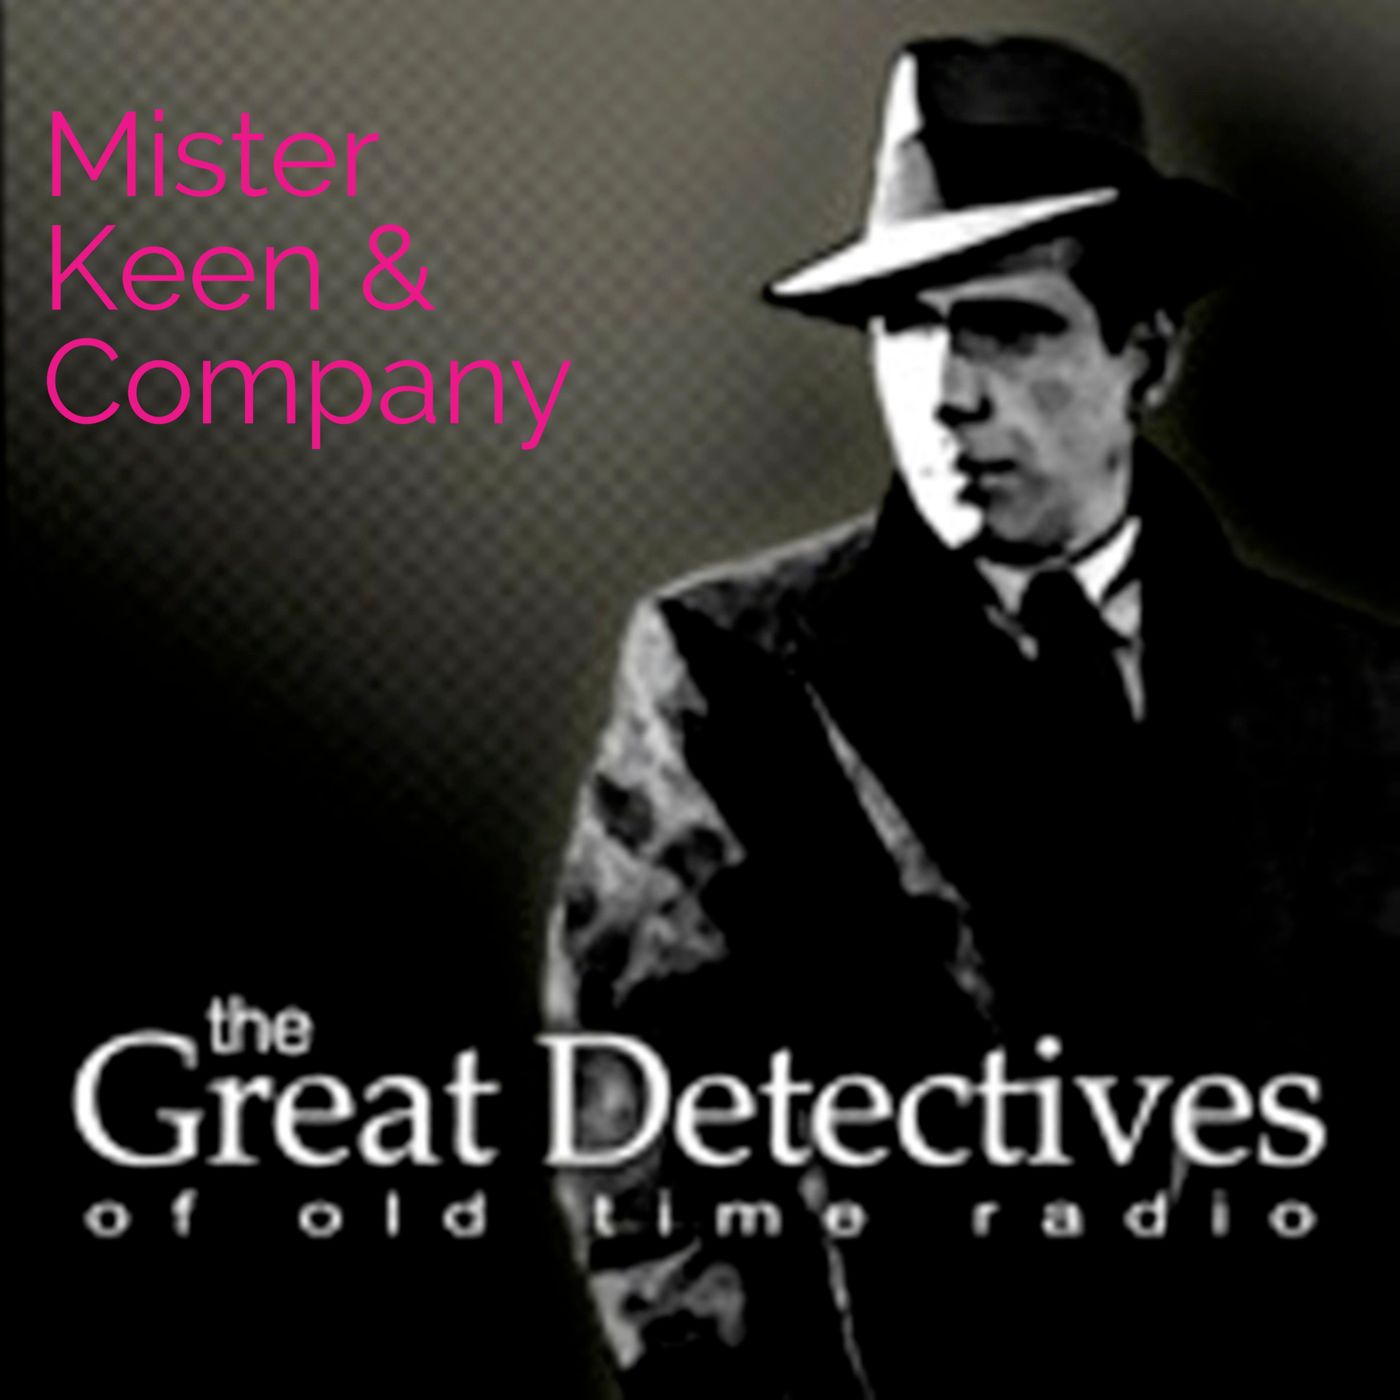 EP2619: Mister Keen: The Telephone Book Murder Case